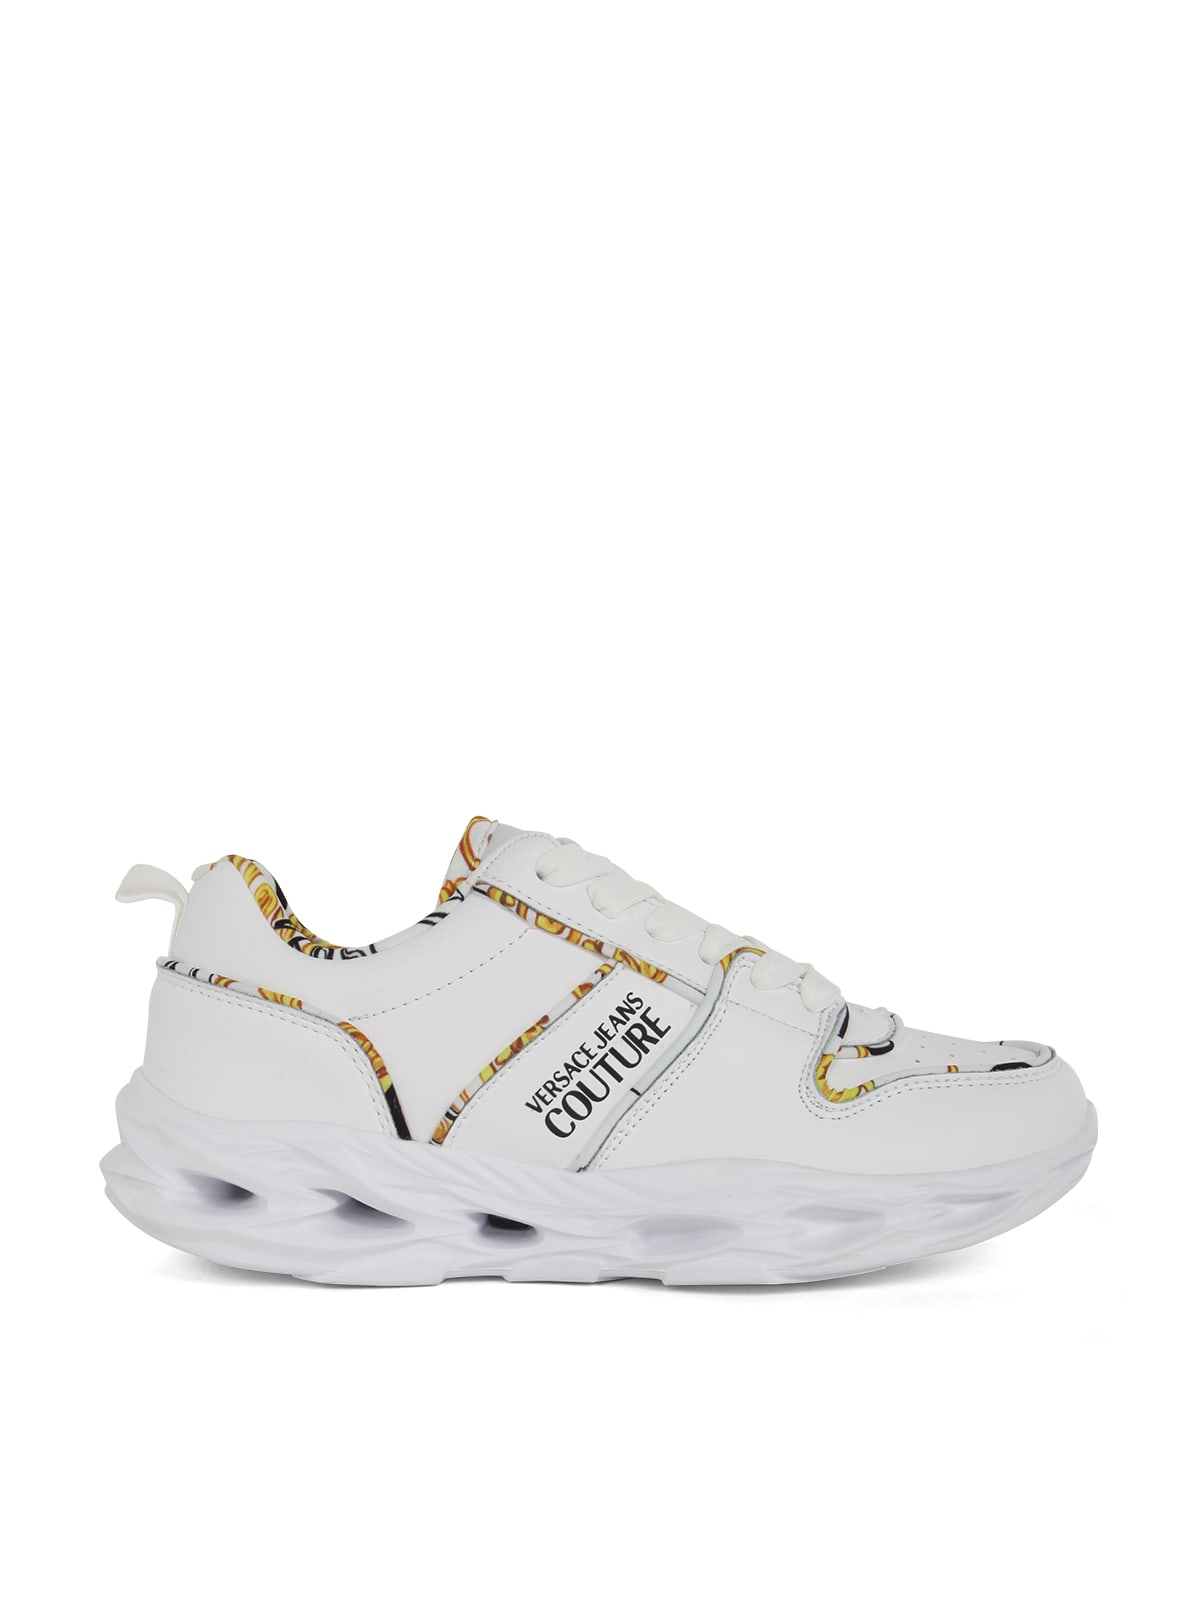 VERSACE JEANS COUTURE OKINAWA 63 SNEAKERS